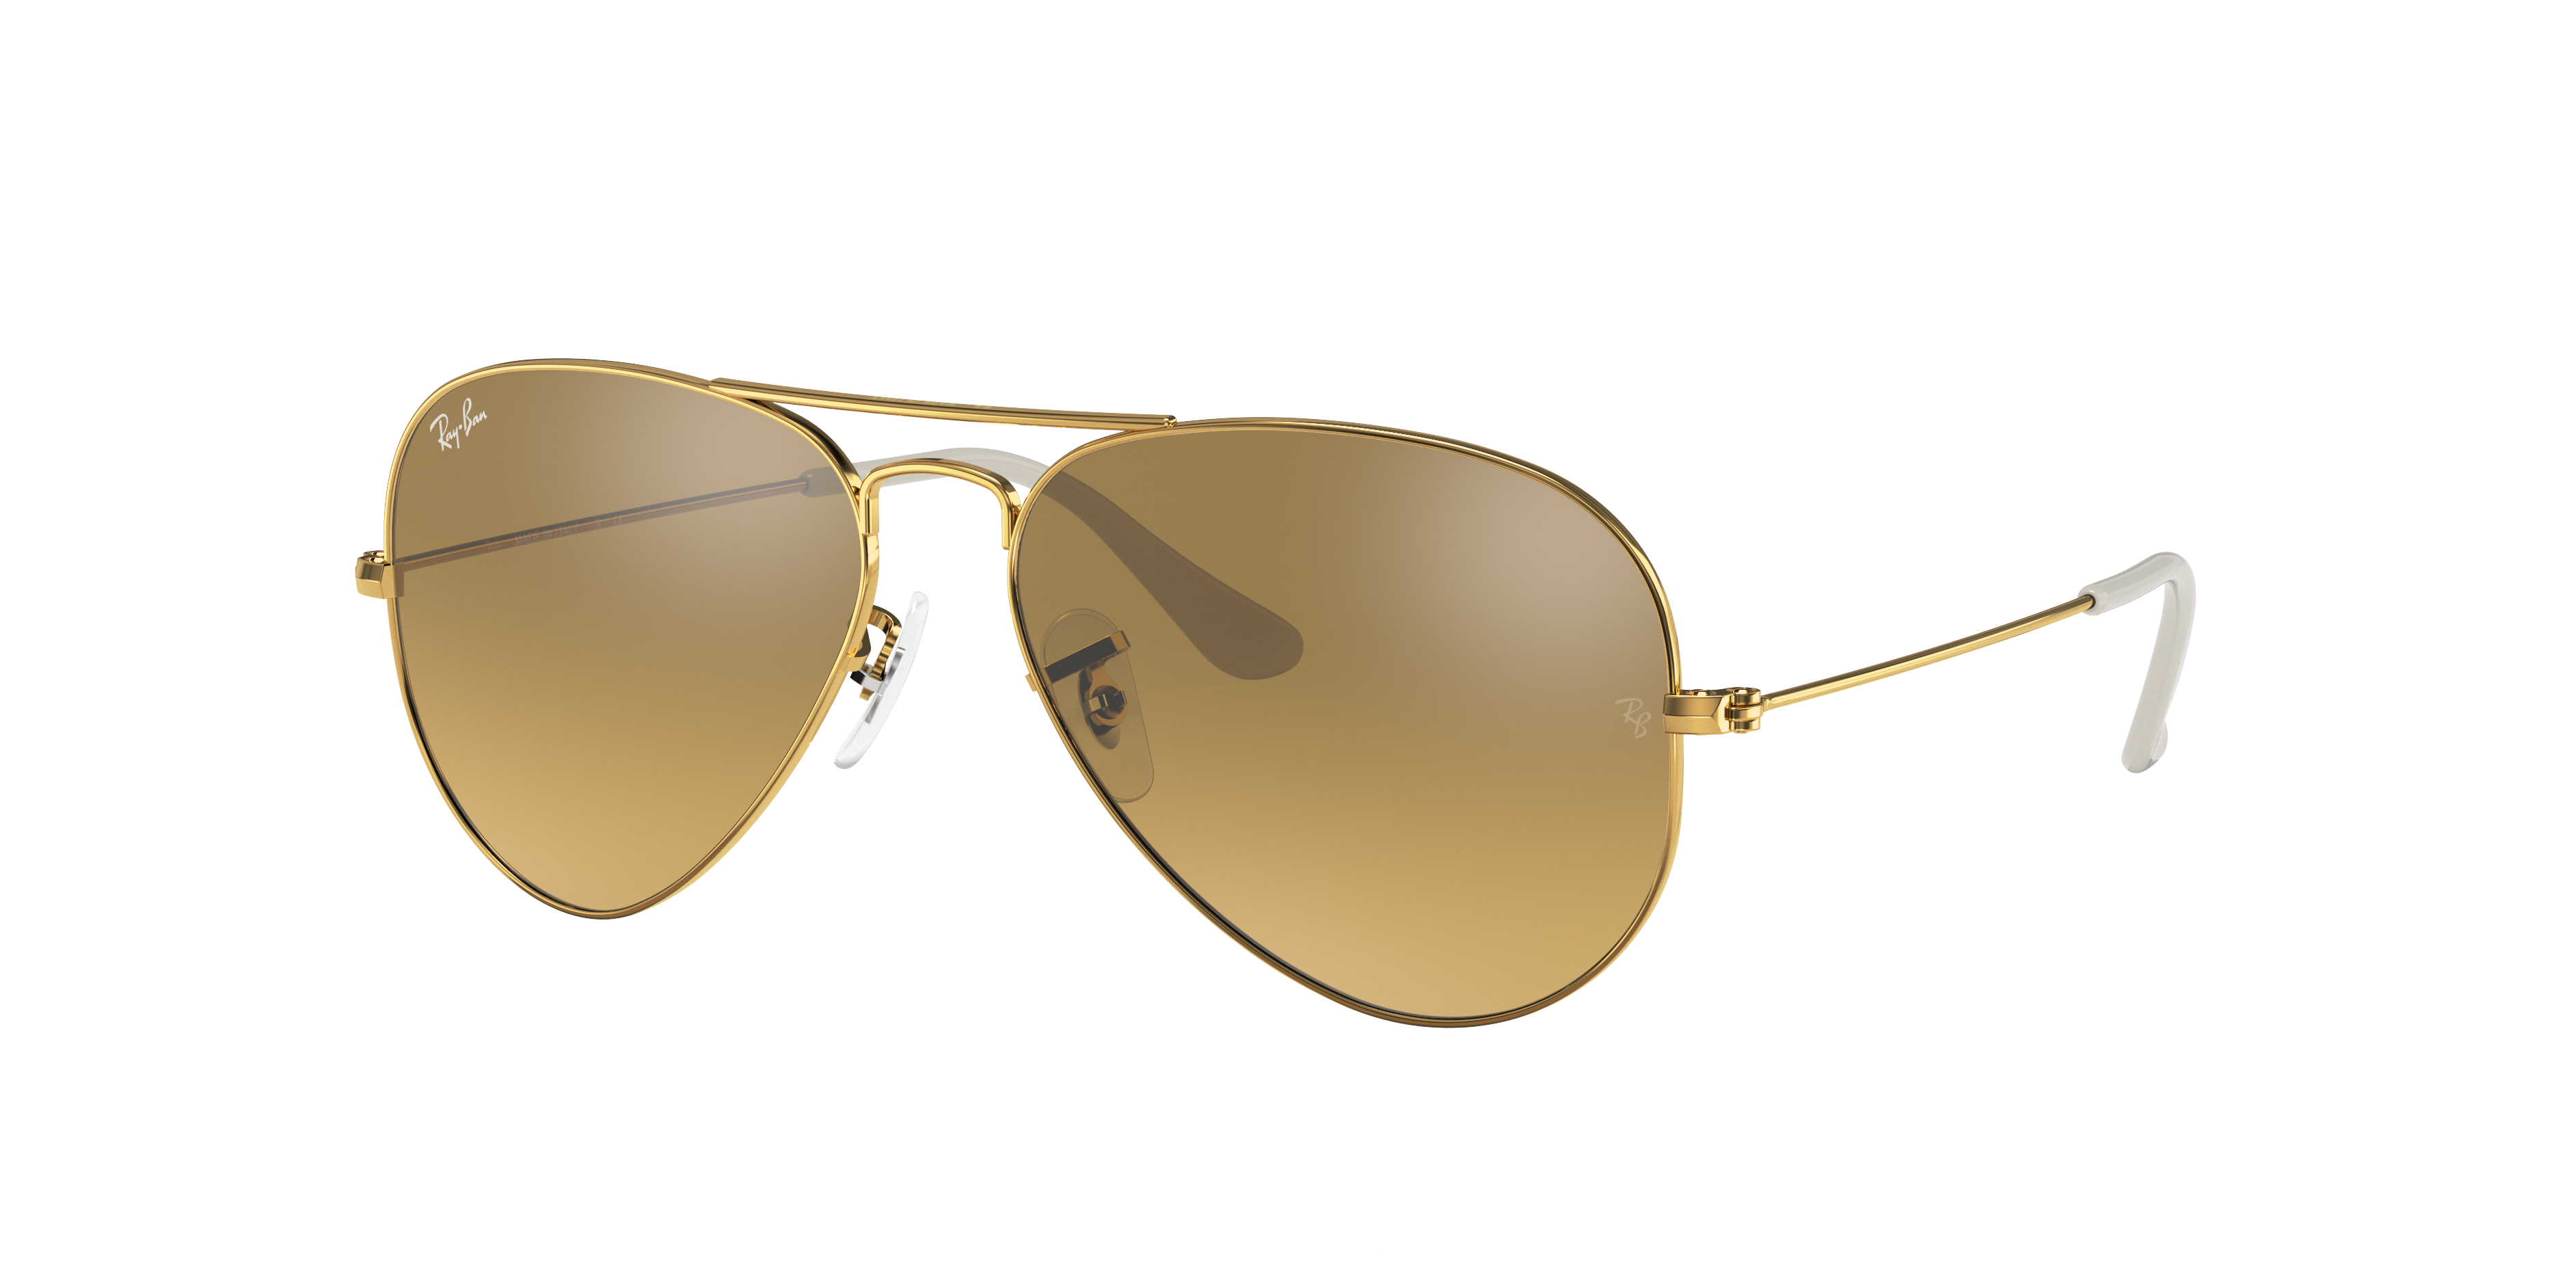 Ray-Ban RB3025 Aviator Gradient Sunglasses with Gold Frame Light Brown